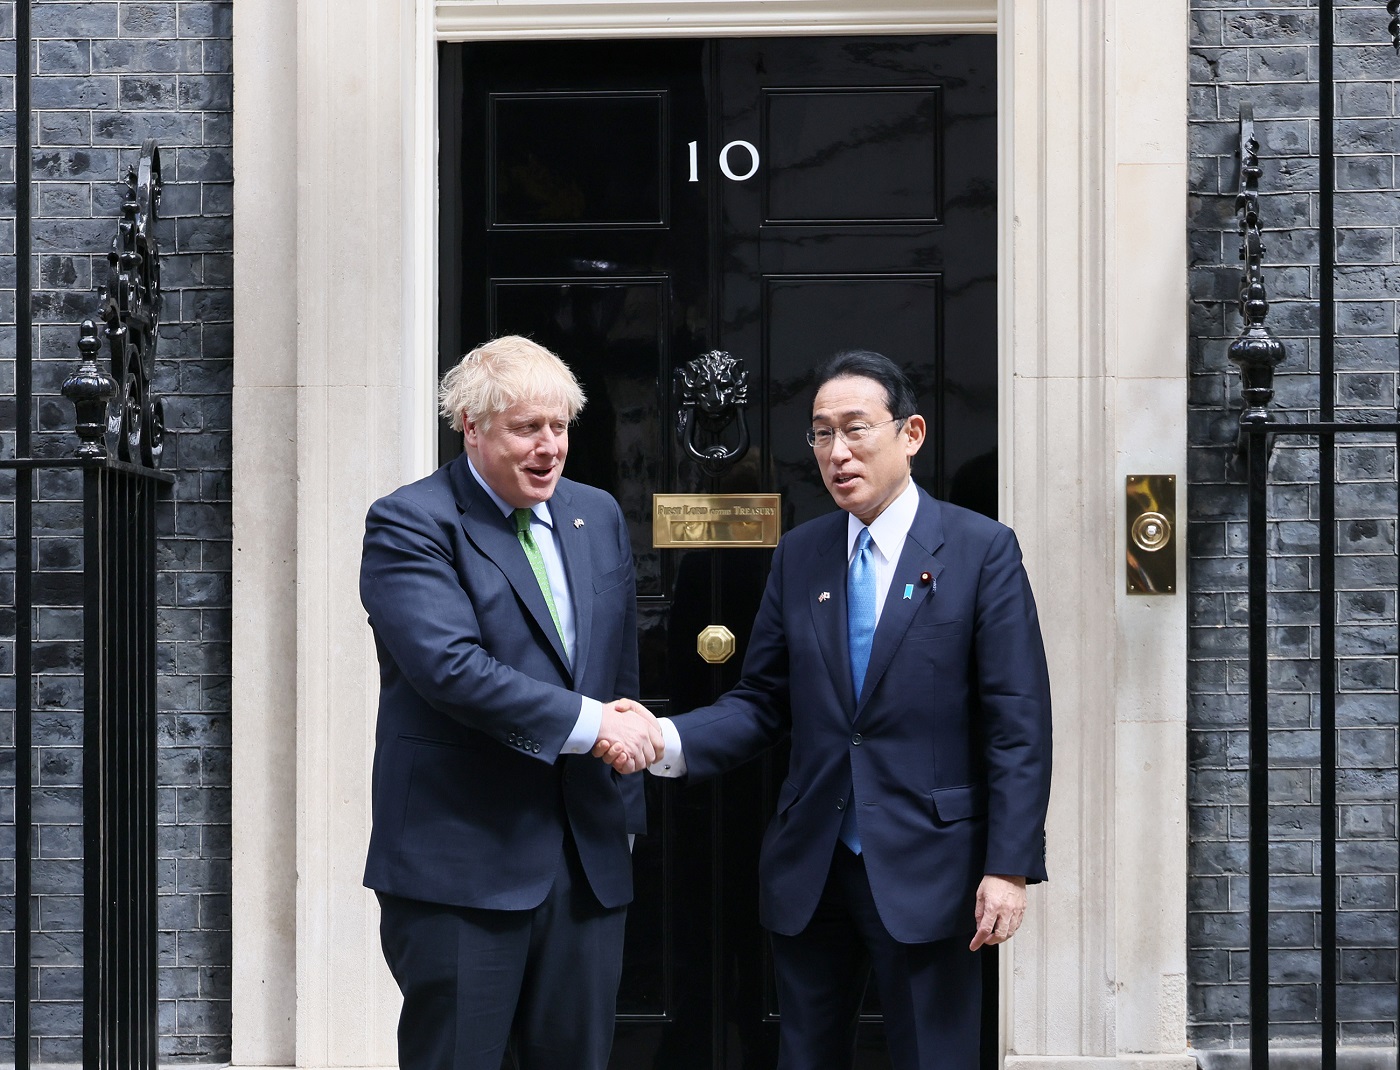 Photograph of the Prime Minister being welcomed by Prime Minister Johnson (1)